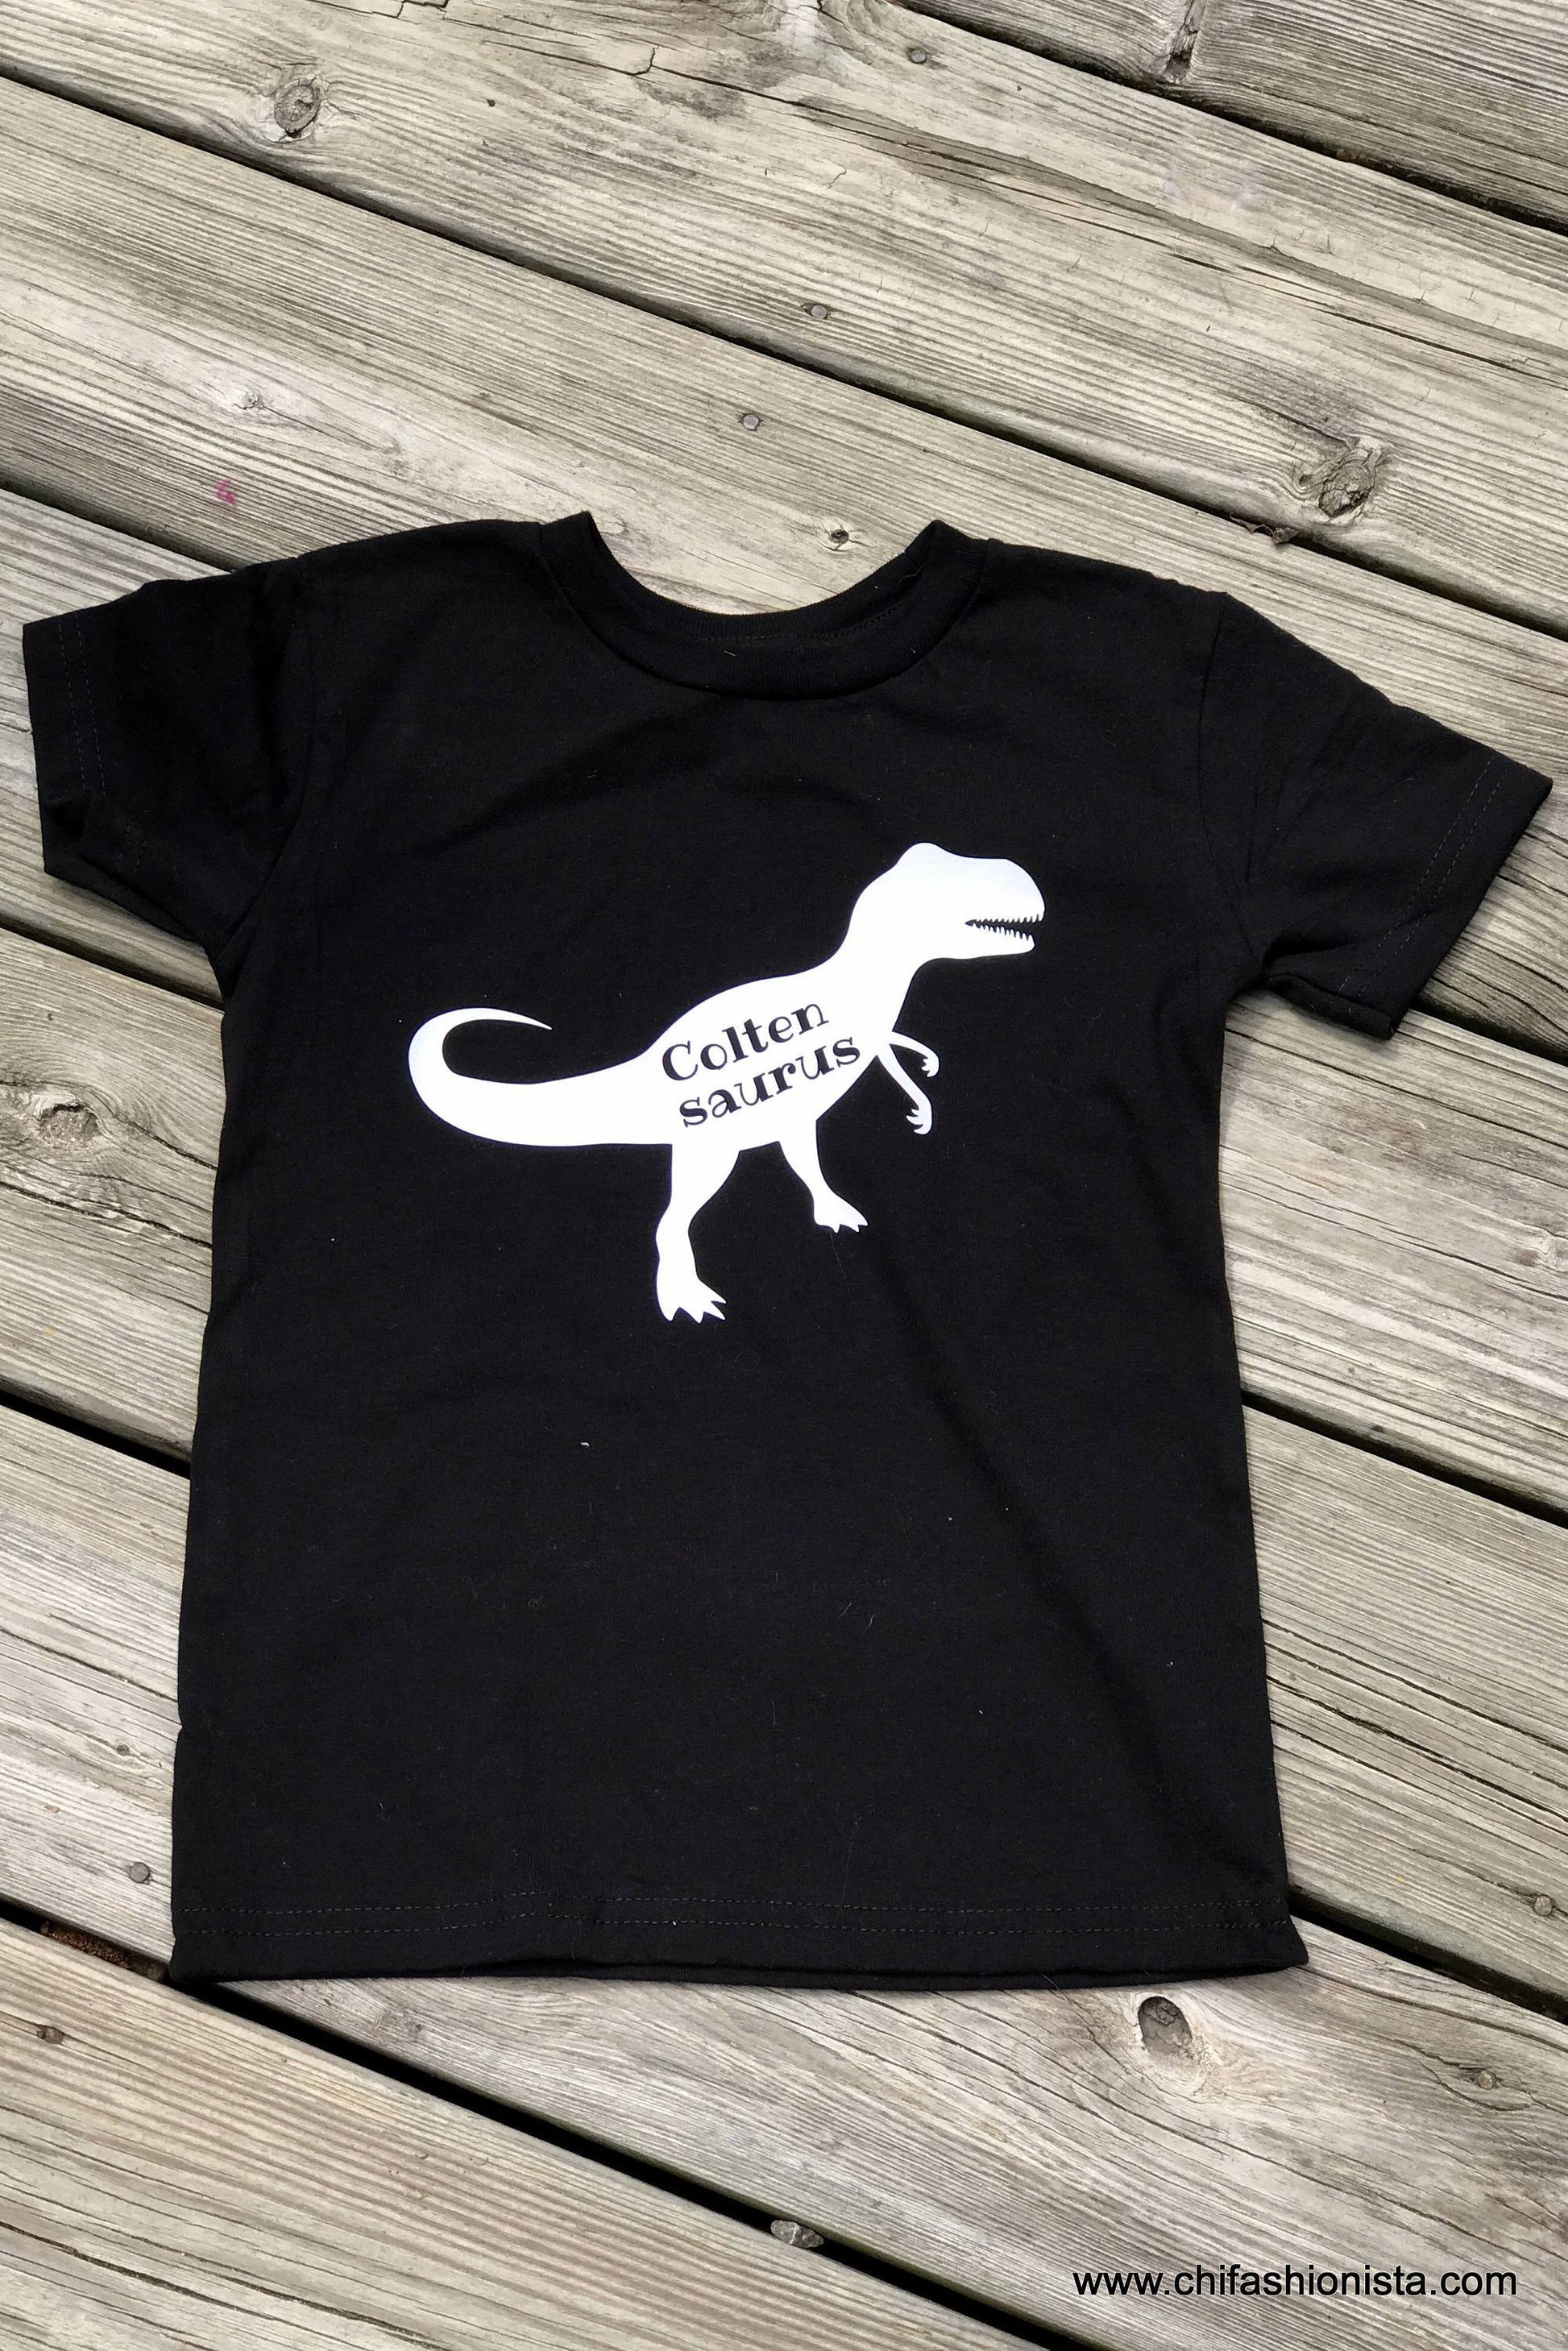 Handcrafted Children's Clothing, Clothing for Children and Parents, Dinosaur Name Shirt, chi-fashionista